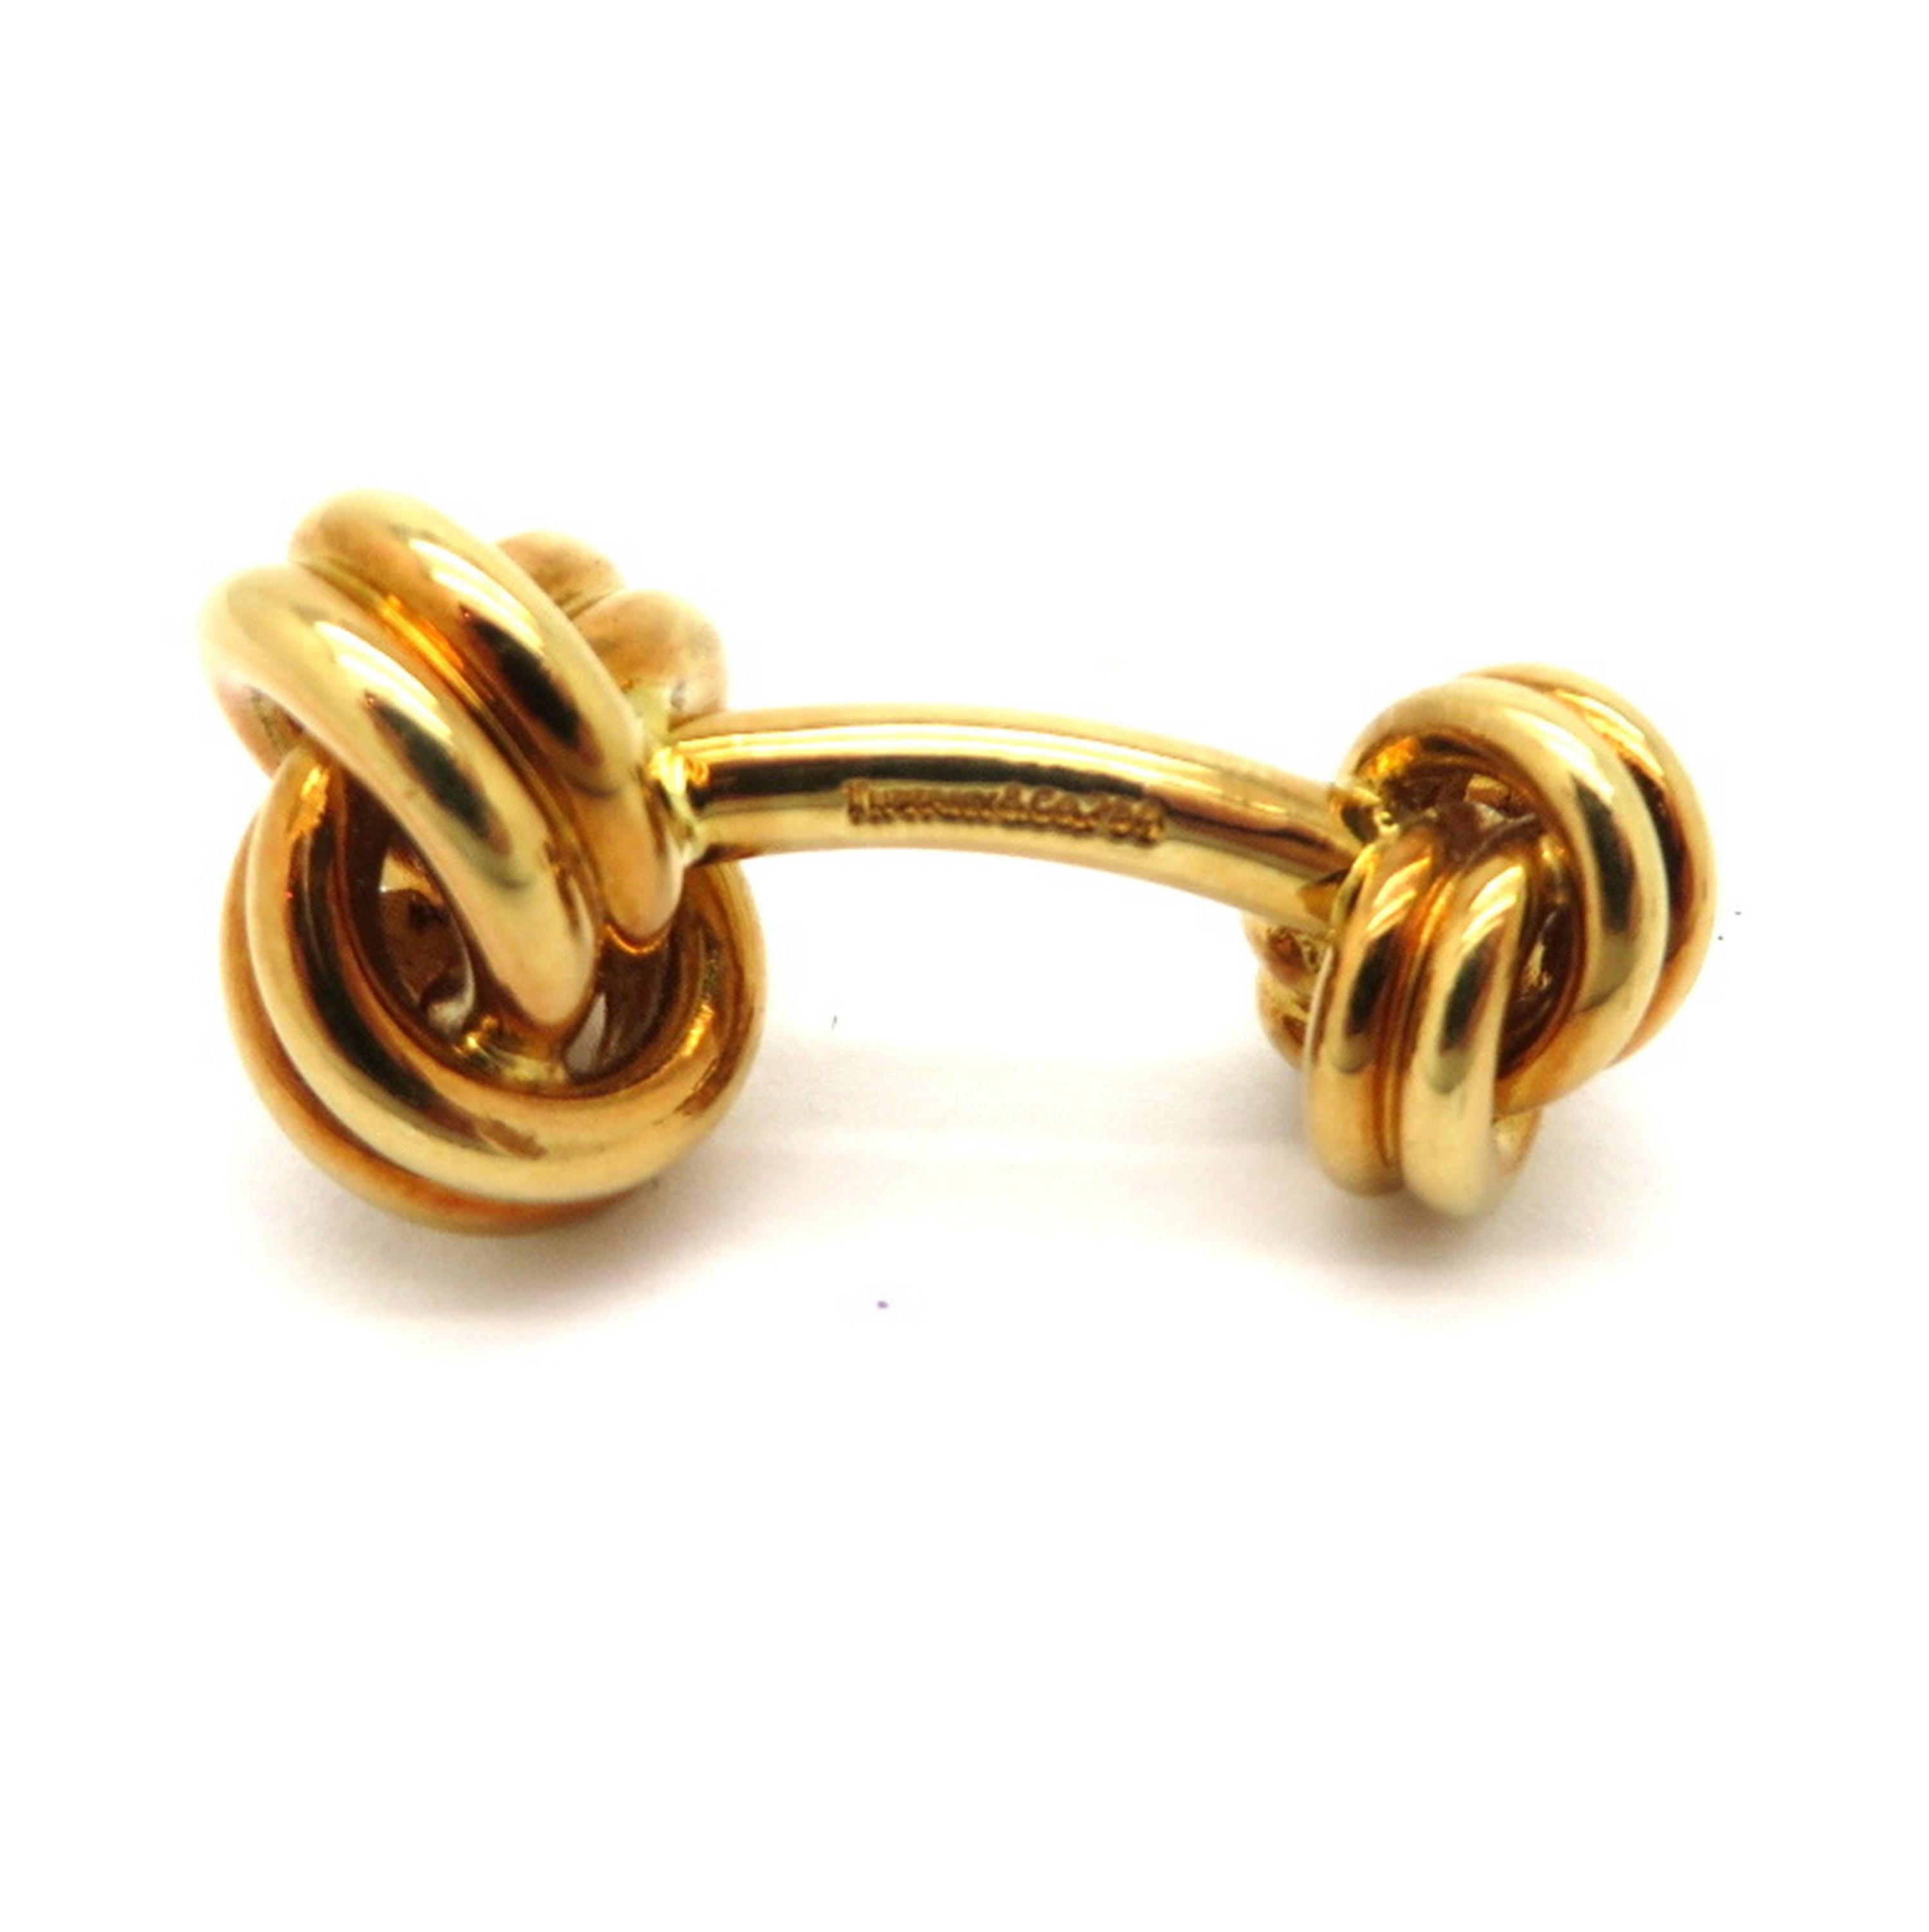 Estate 18K yellow gold Tiffany & Co. love knot cufflinks. The designer Tiffany & Co. cufflinks are hallmarked Tiffany & Co. 750. They are each crafted out of 18K solid yellow gold and have a high polish finish. The Tiffany & Co. box is included.